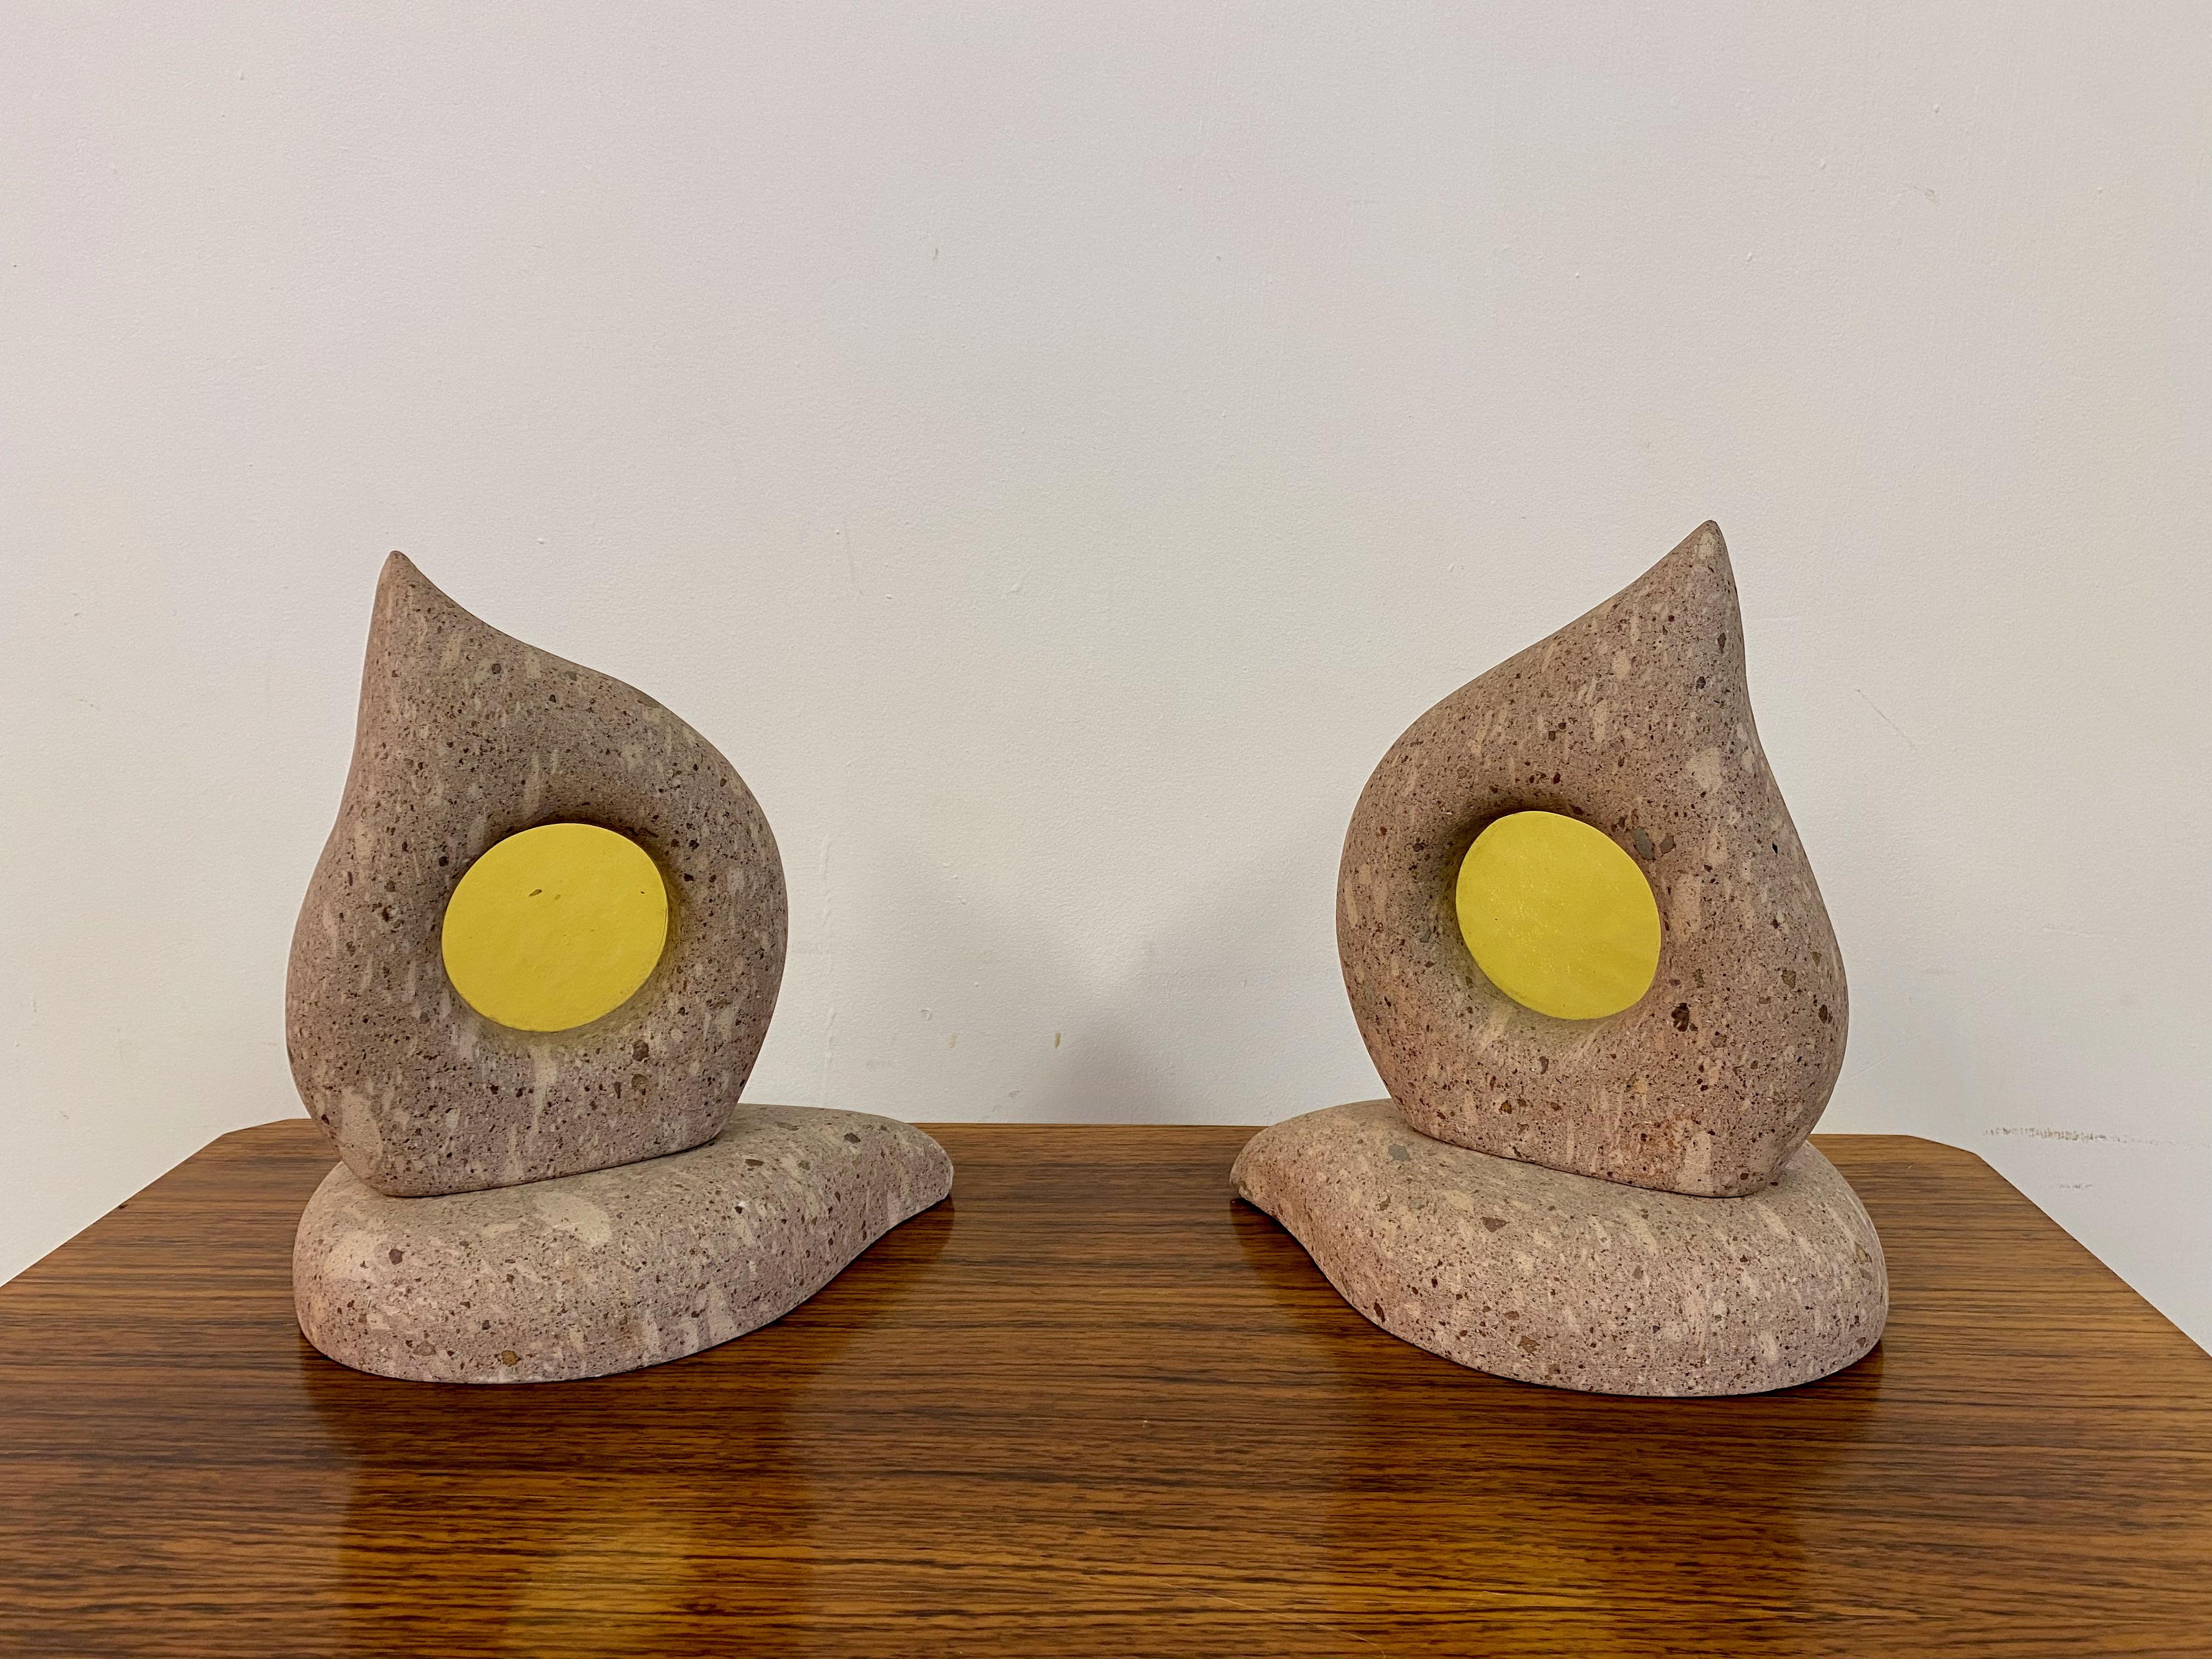 Pair of table lamps.

Travertine or similar stone.

Yellow glass shade inserts.

Shaped like a flame.

1980s Italy.